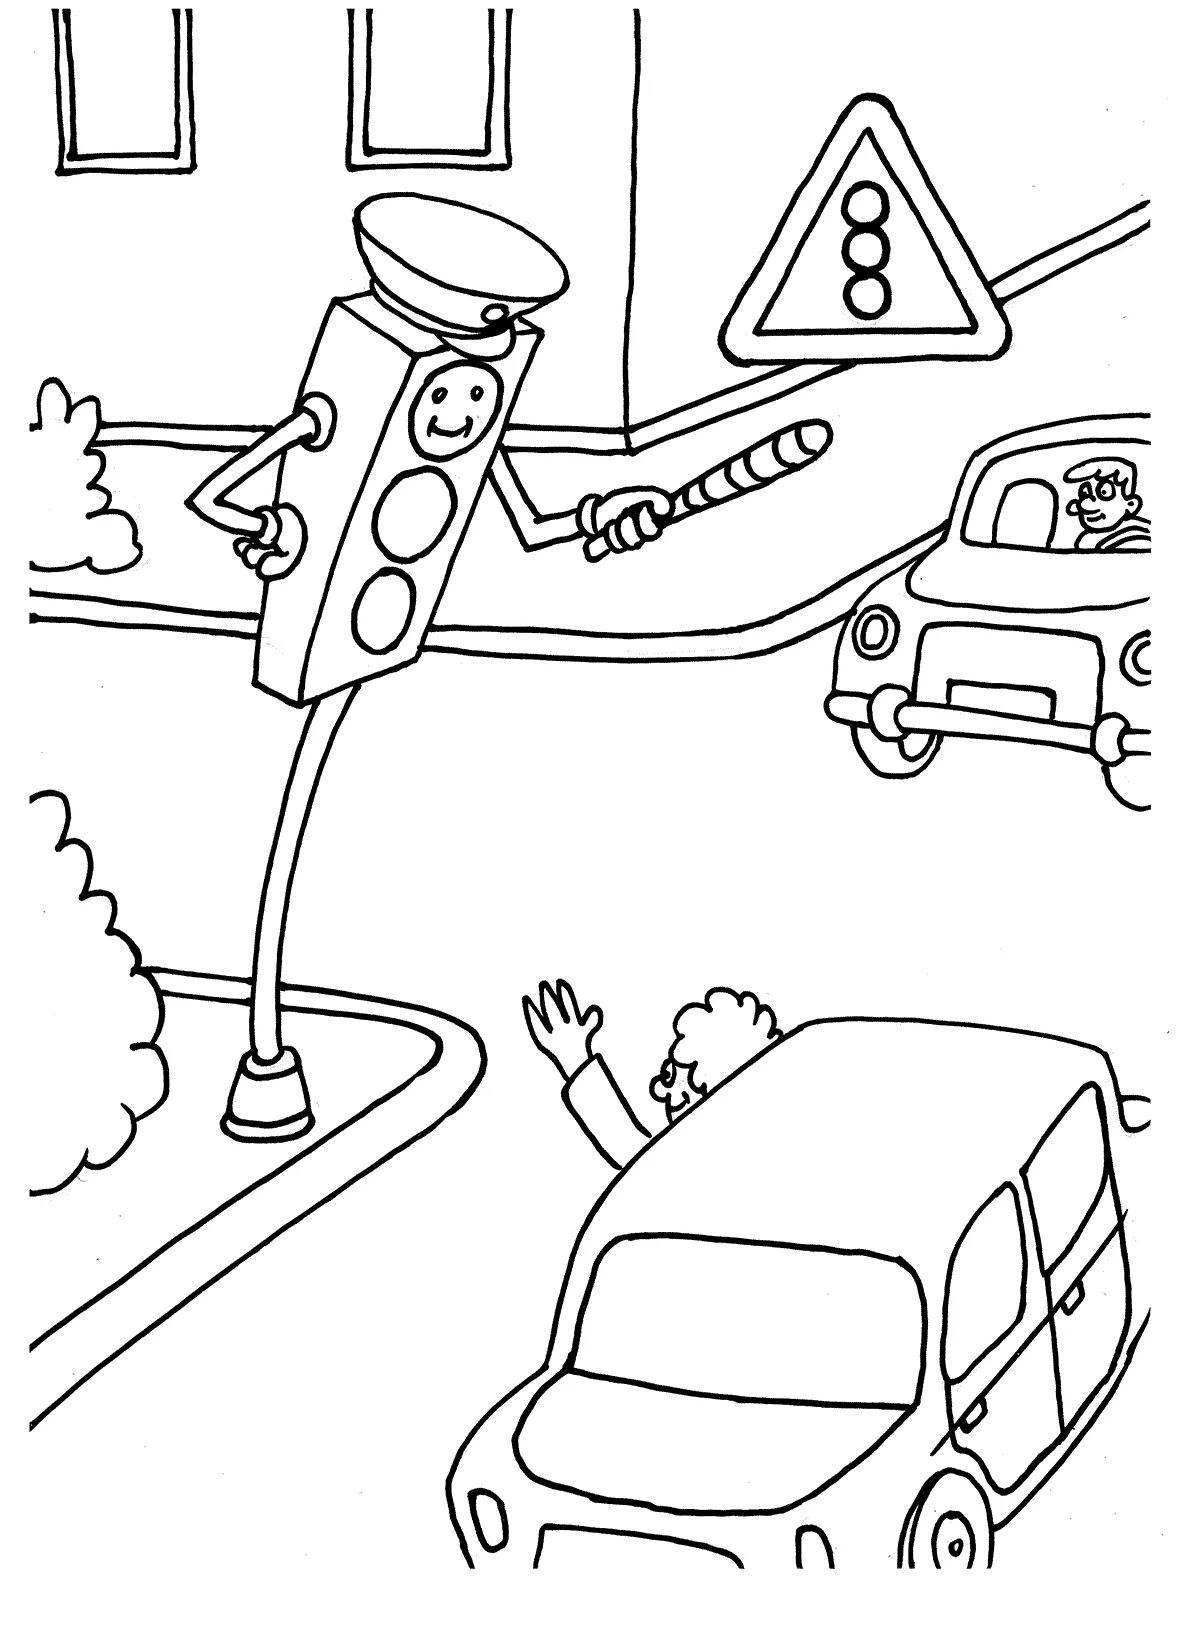 Dramatic traffic light coloring page